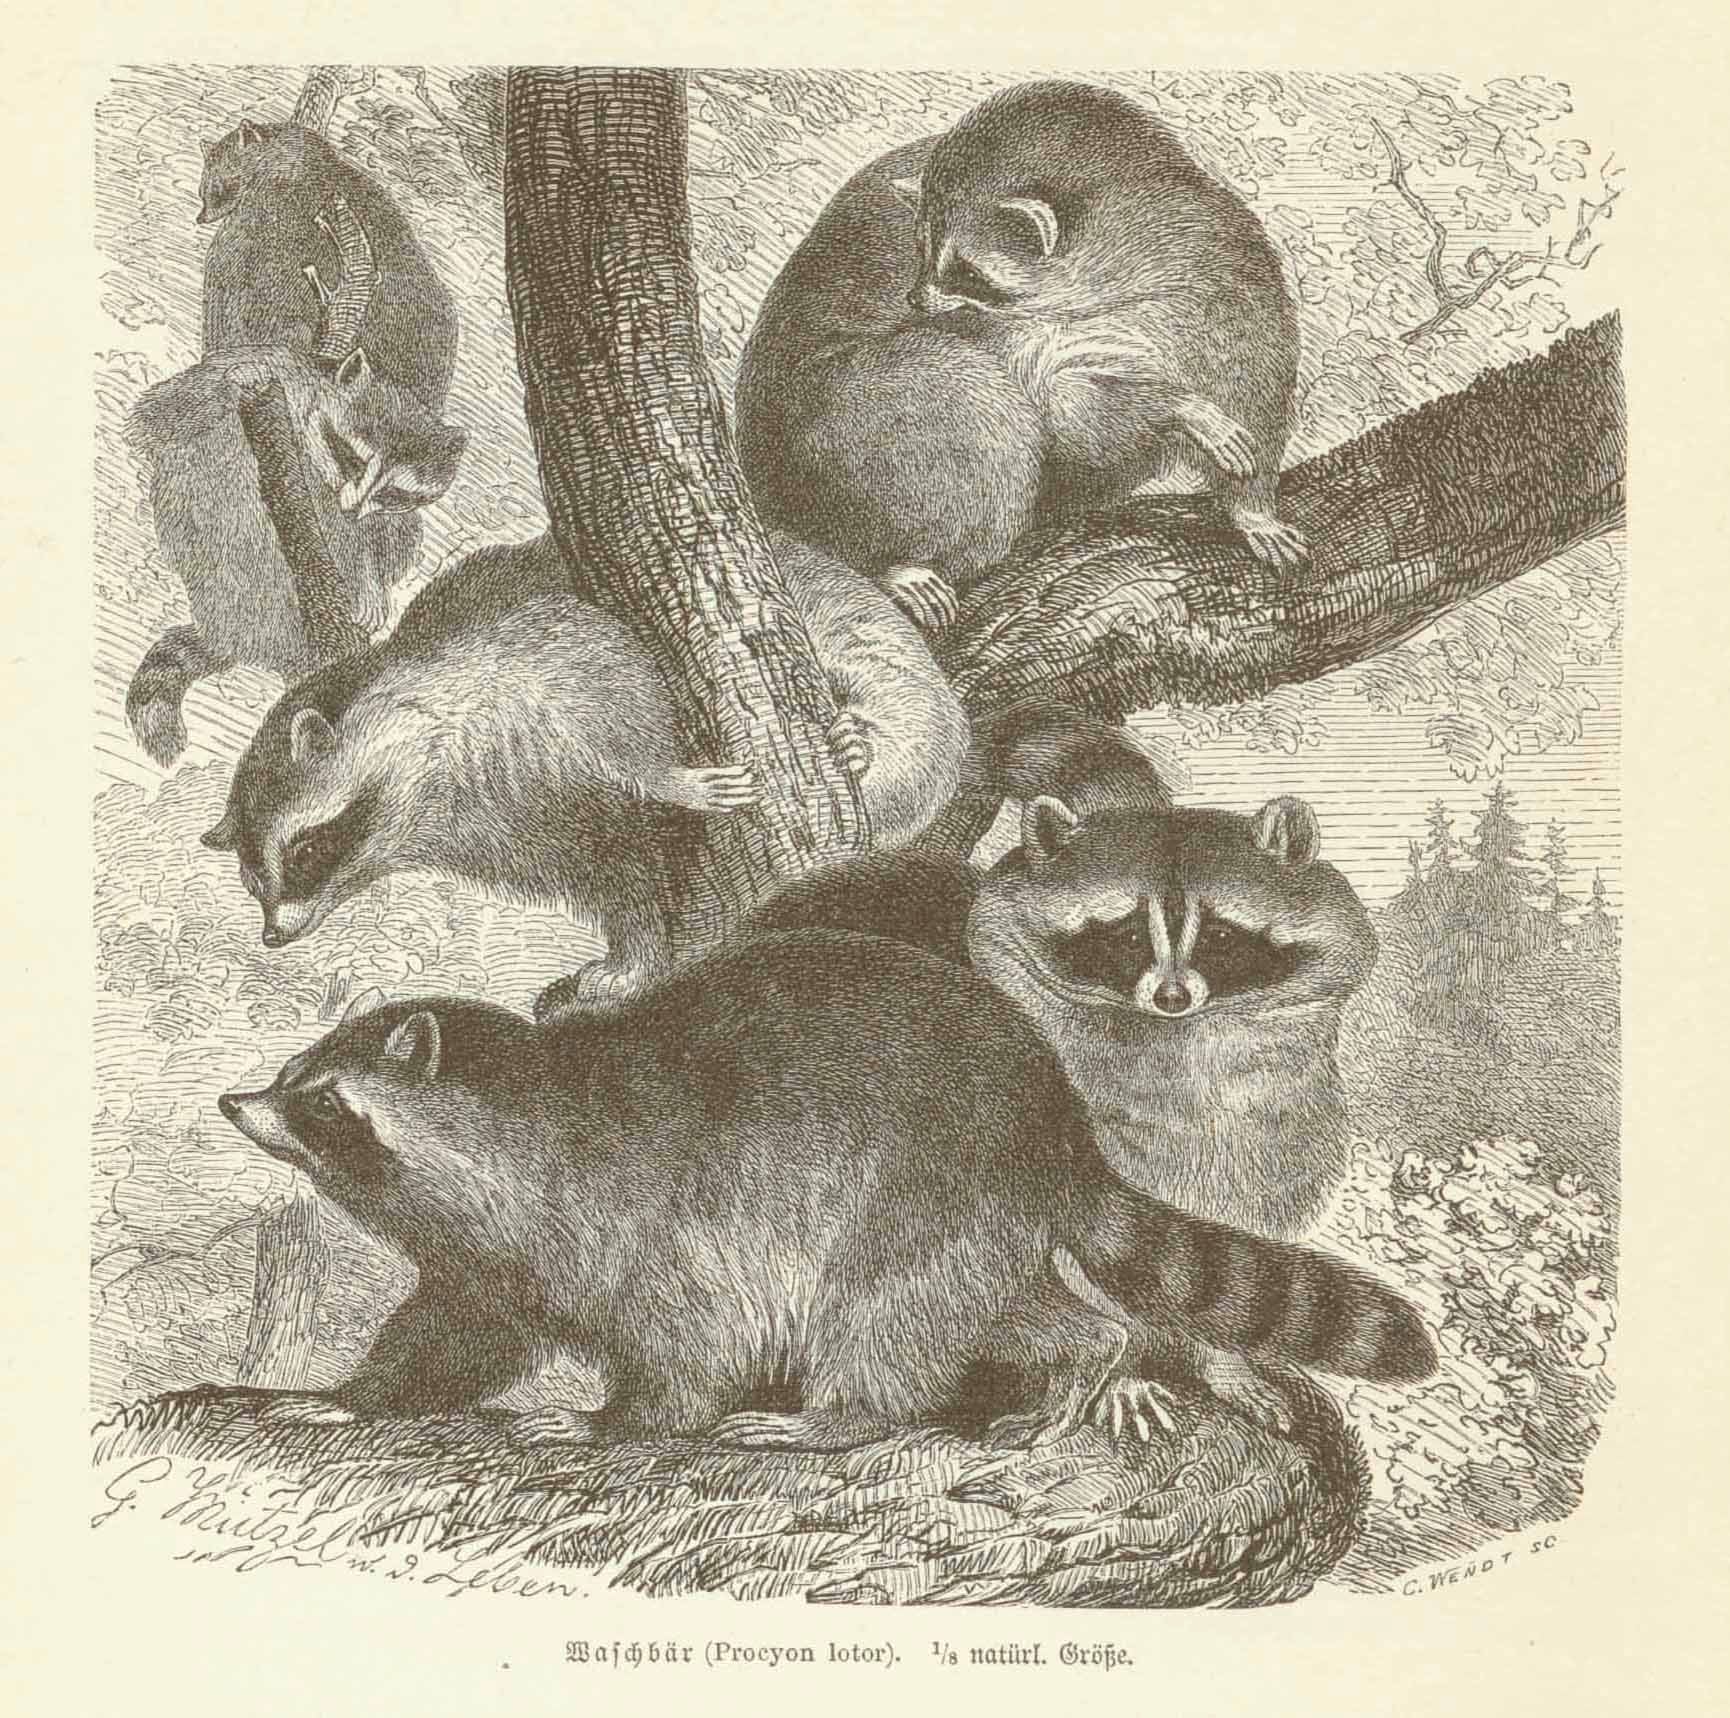 "Waschbaer (Procyon lotor)" (racoon)  Wood engraving on a page of text with an article about racoons  that continues on the reverse side. Published 1893.